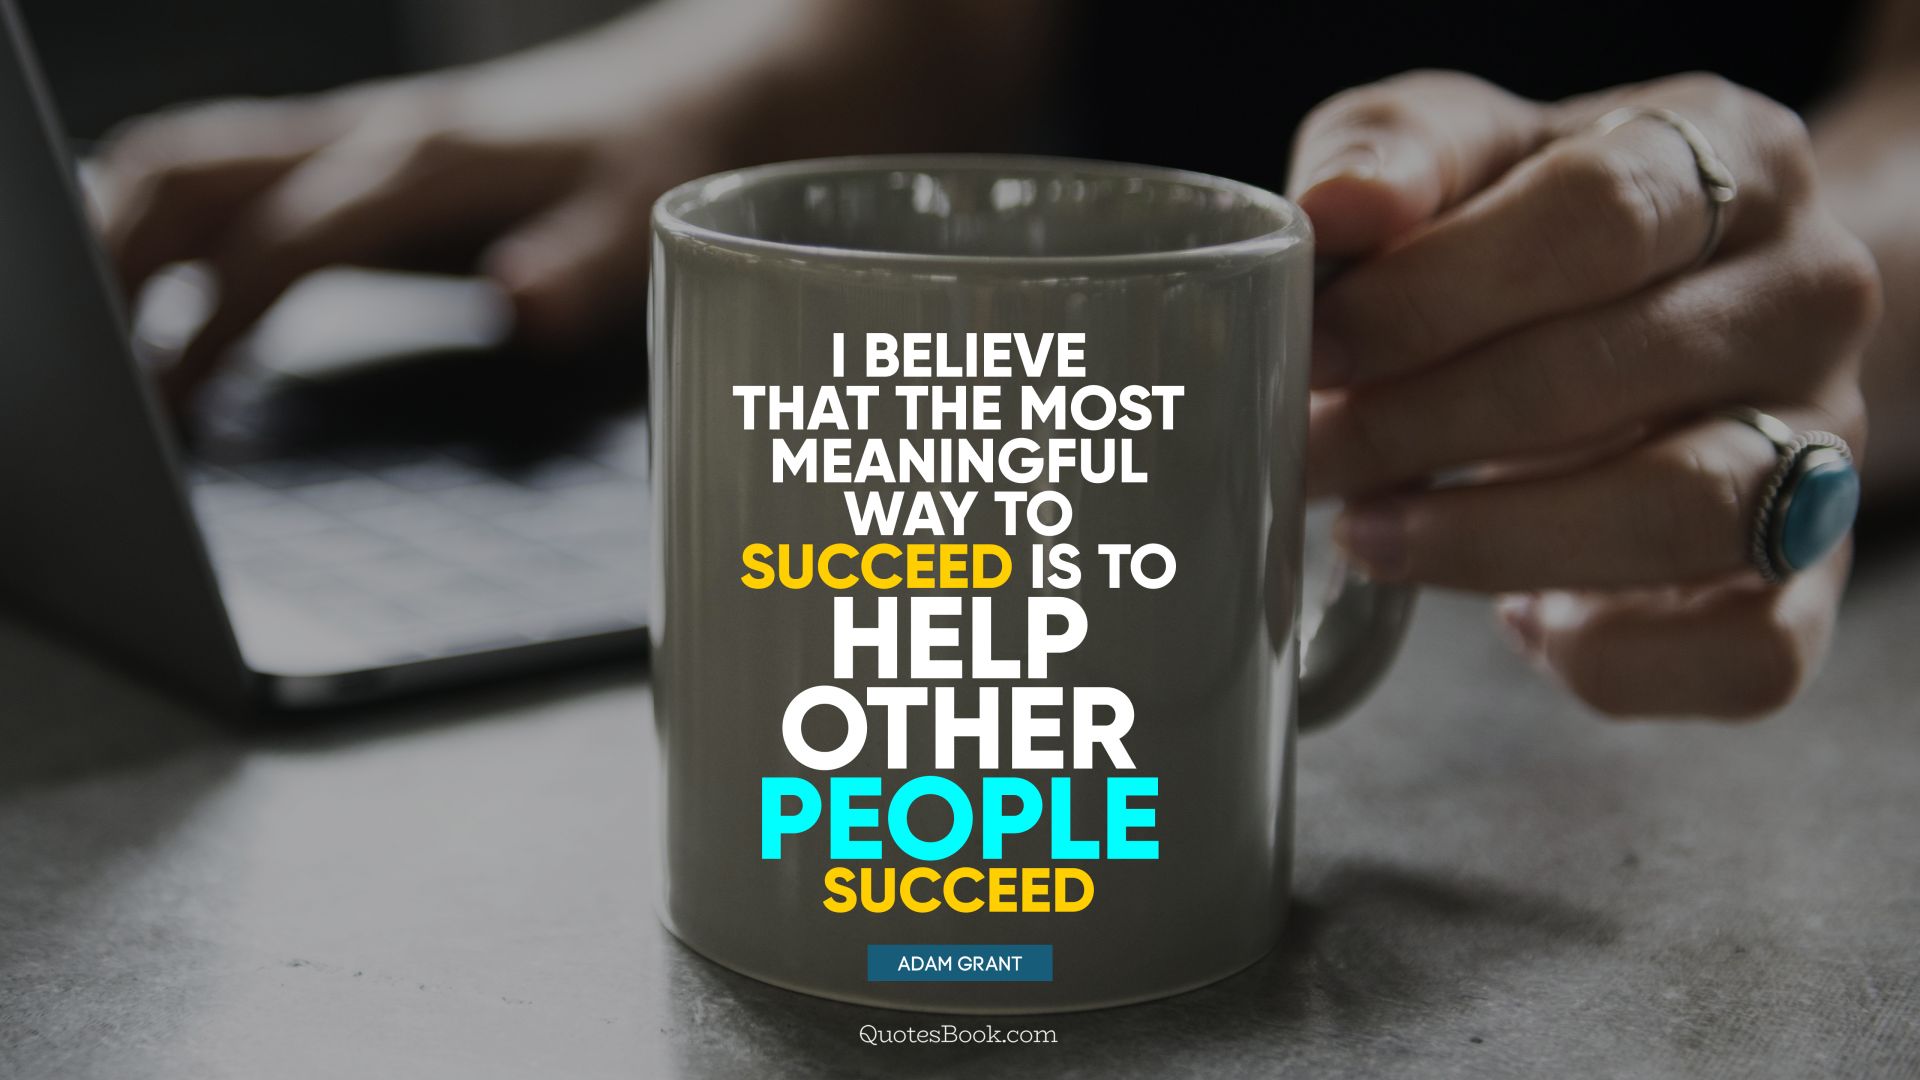 I believe that the most meaningful way to succeed is to help other people succeed. - Quote by Adam Grant